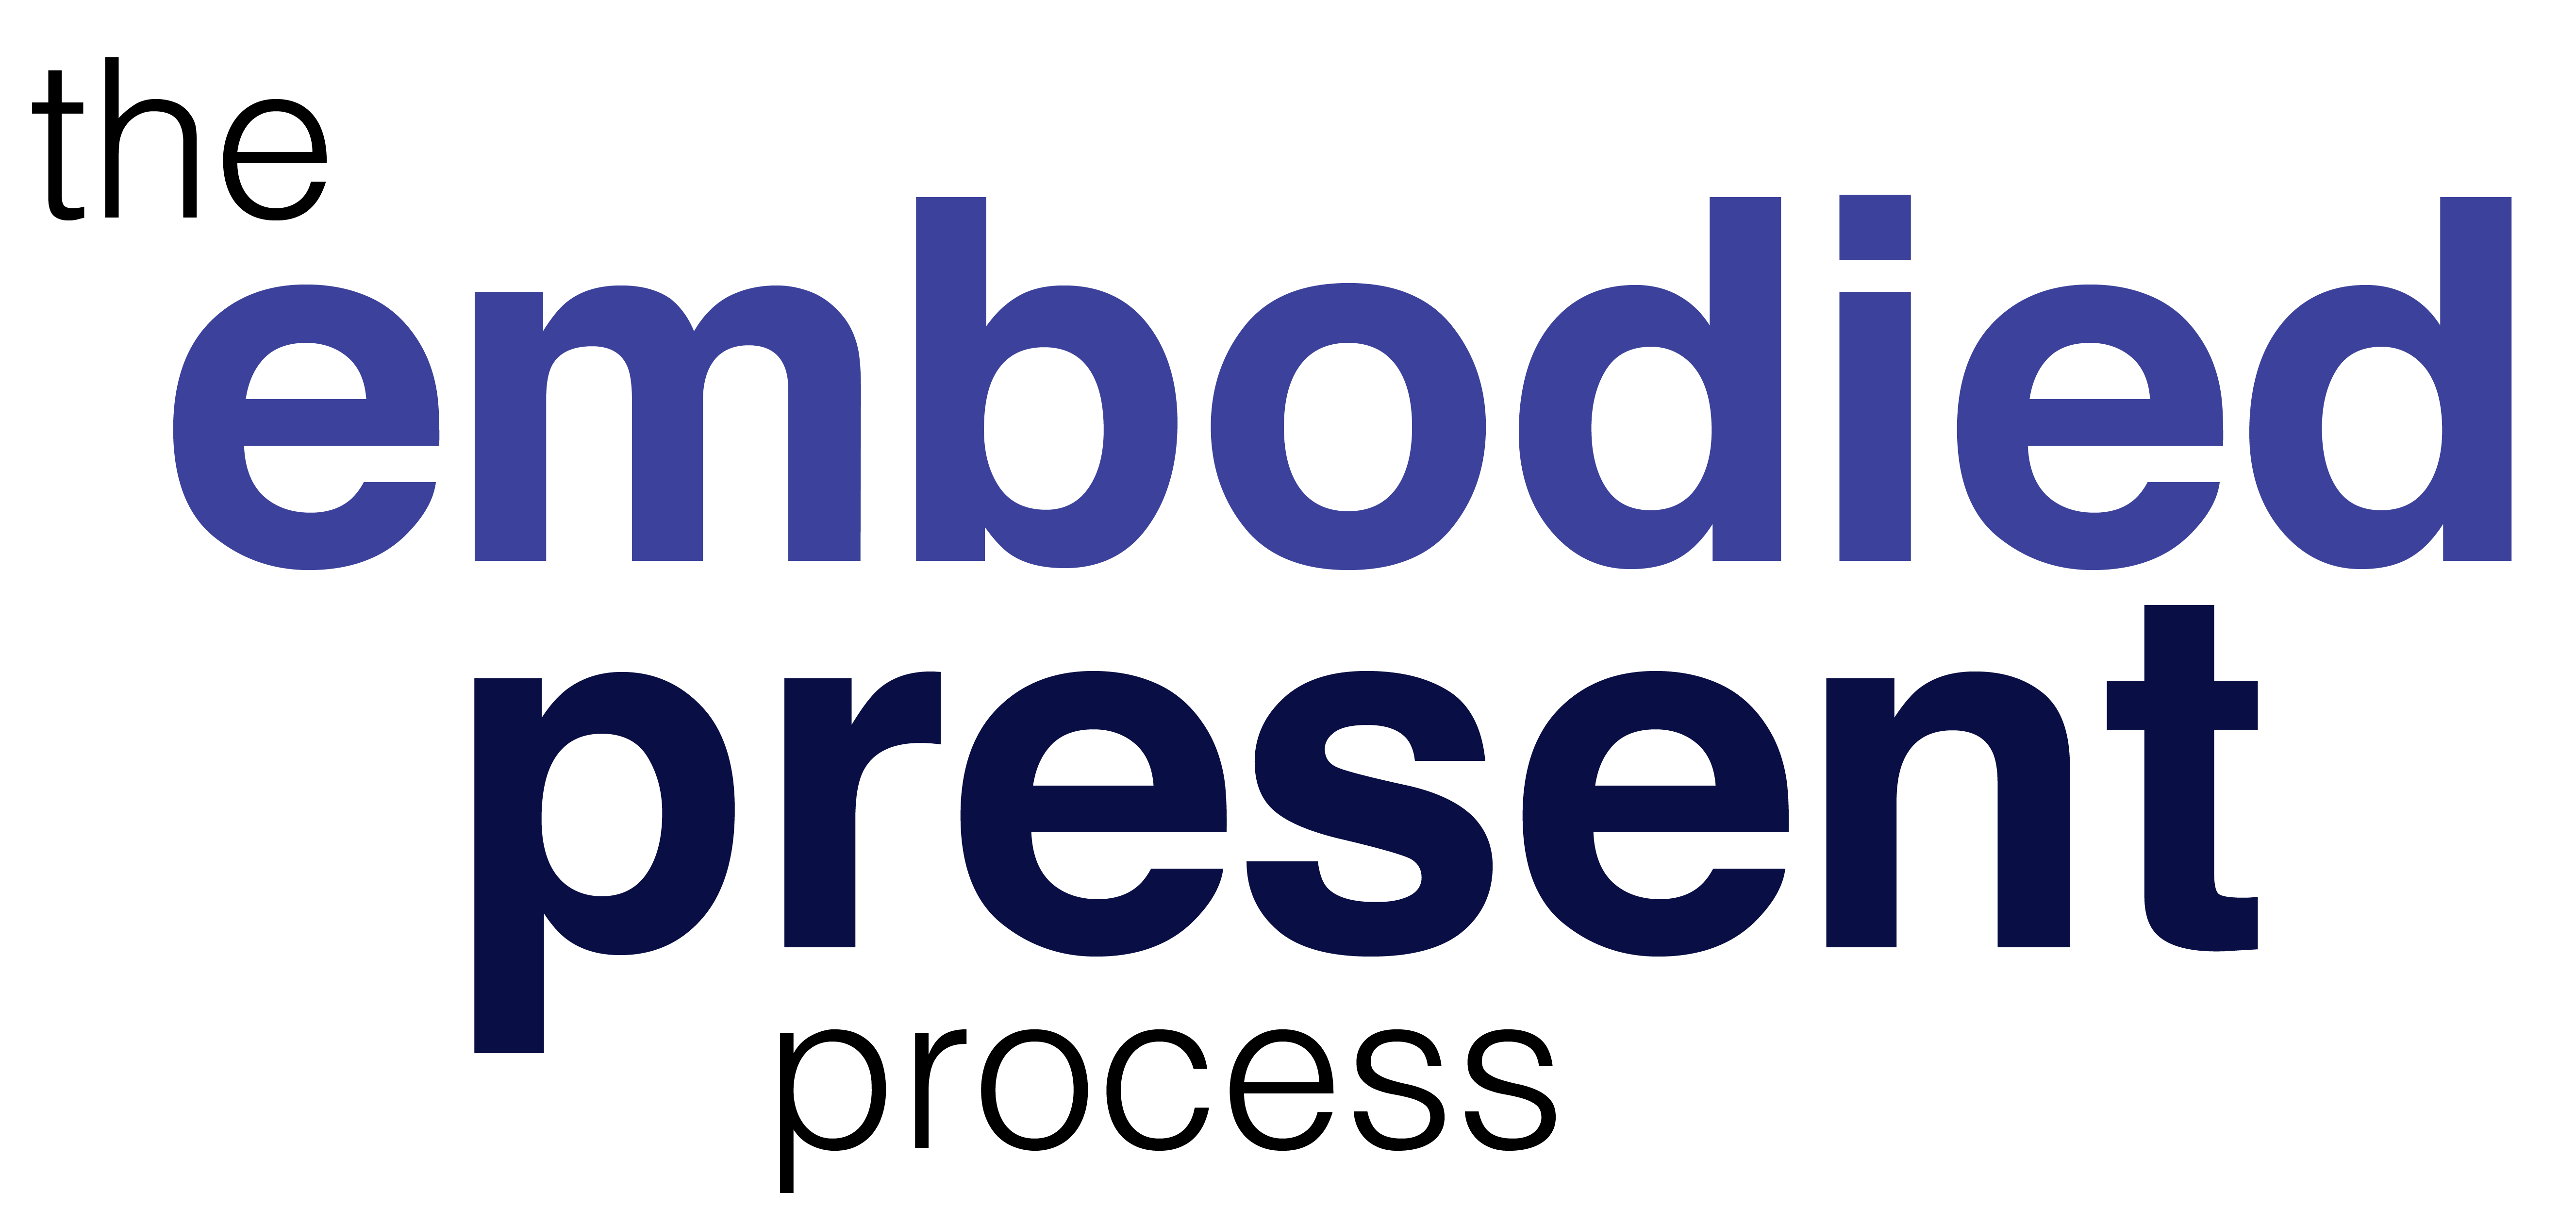 The Embodied Present Process